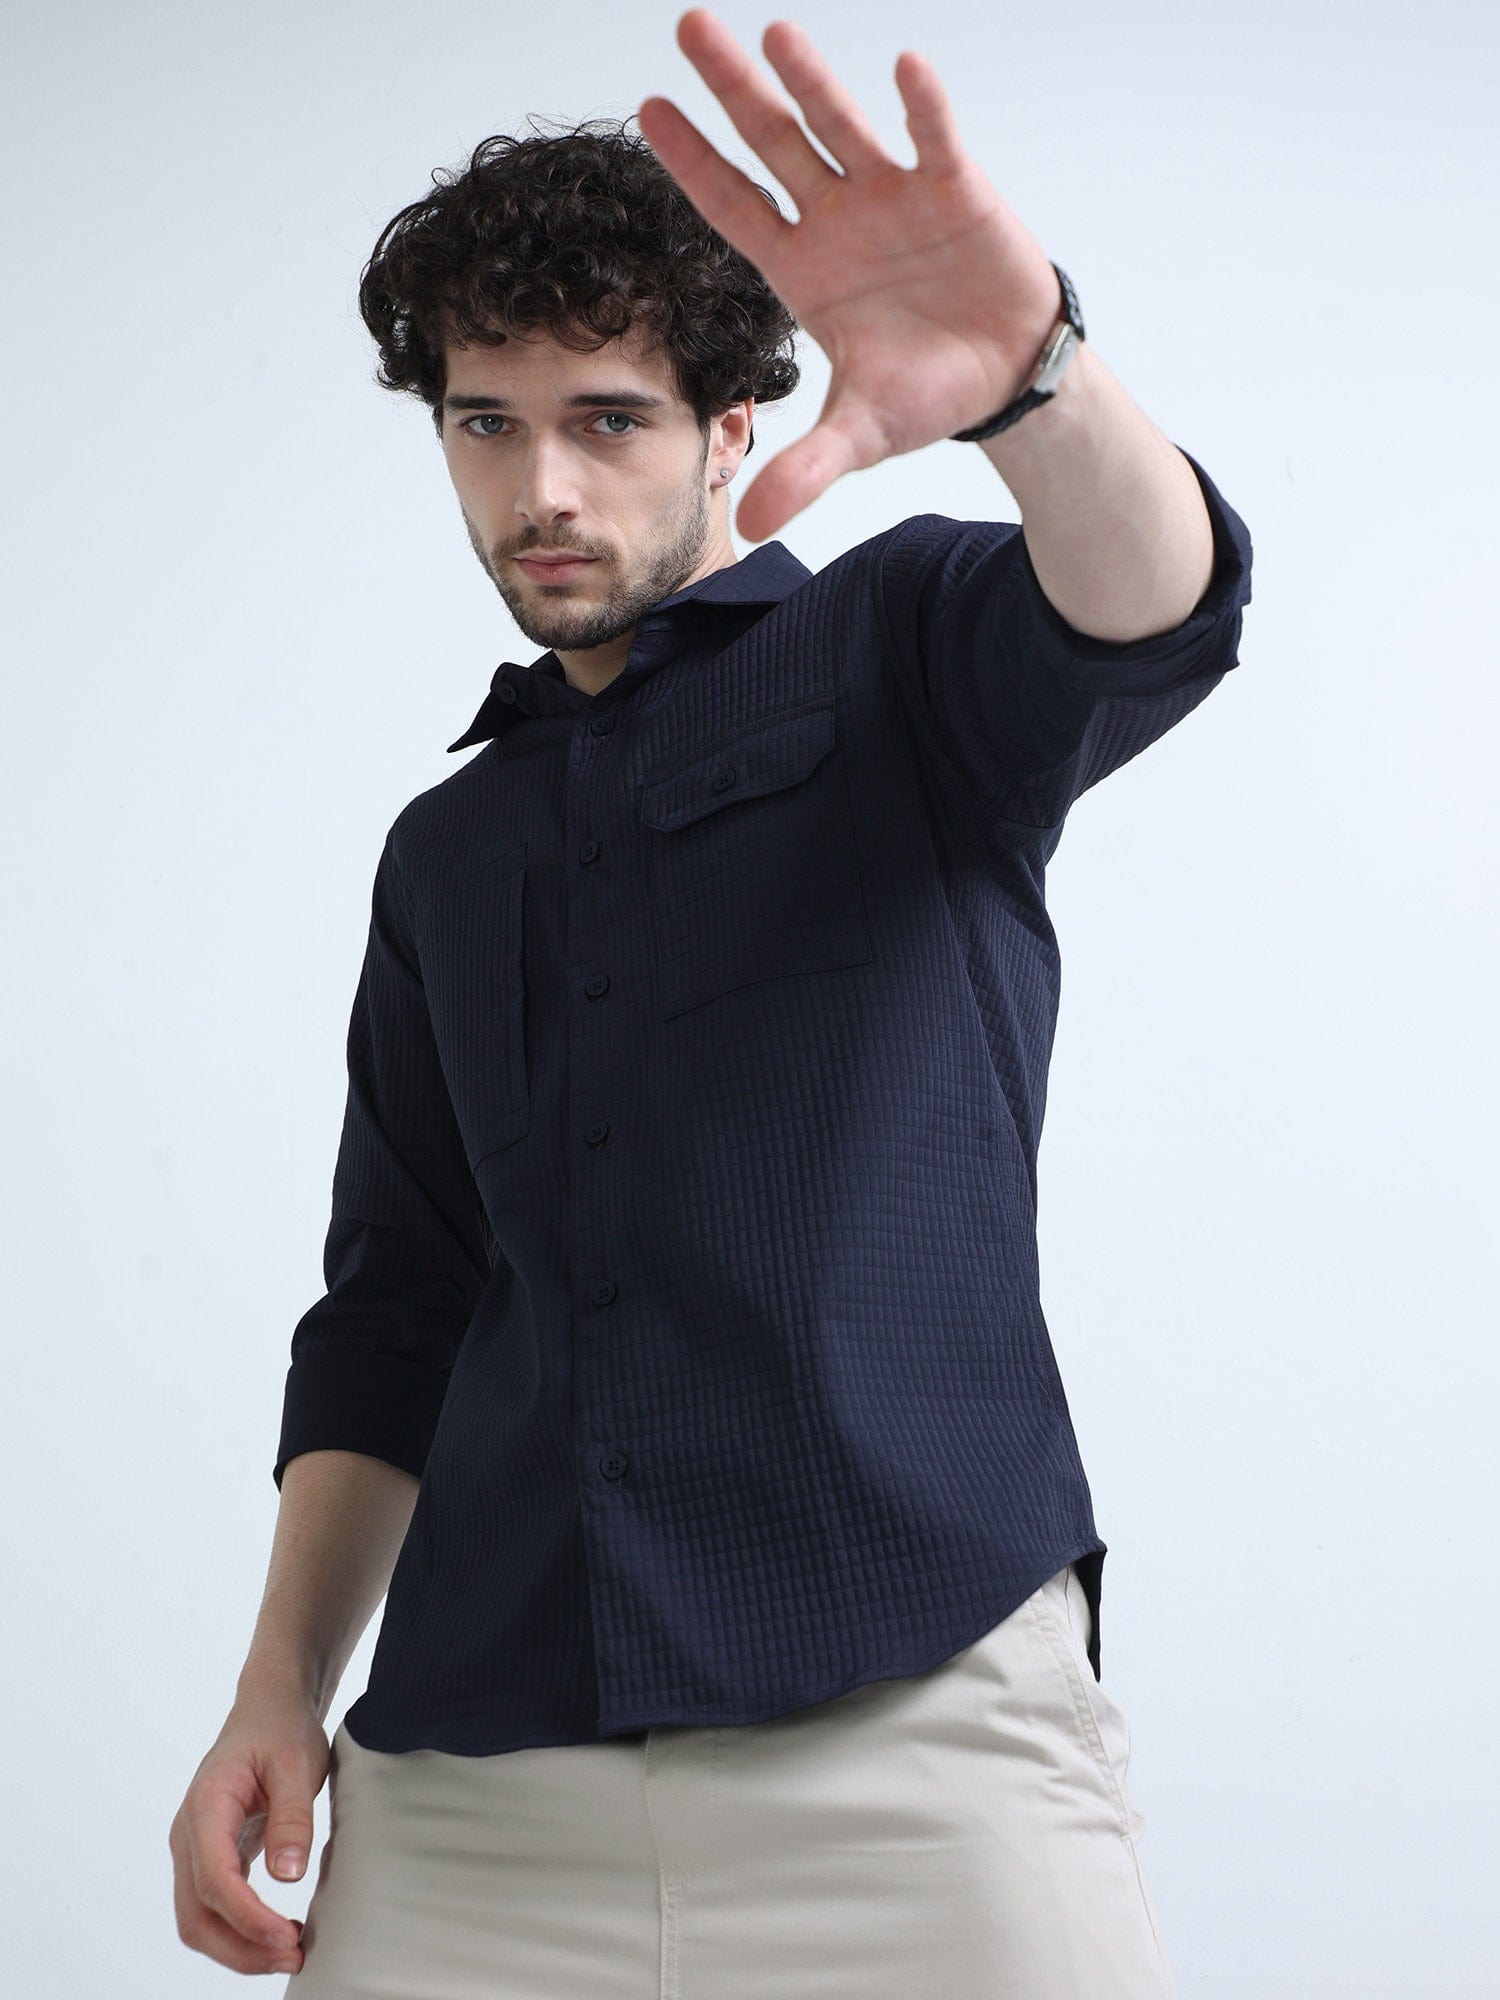 Buy Latest Dark Navy Blue Colour Shirt Online At Great PriceRs. 1349.00